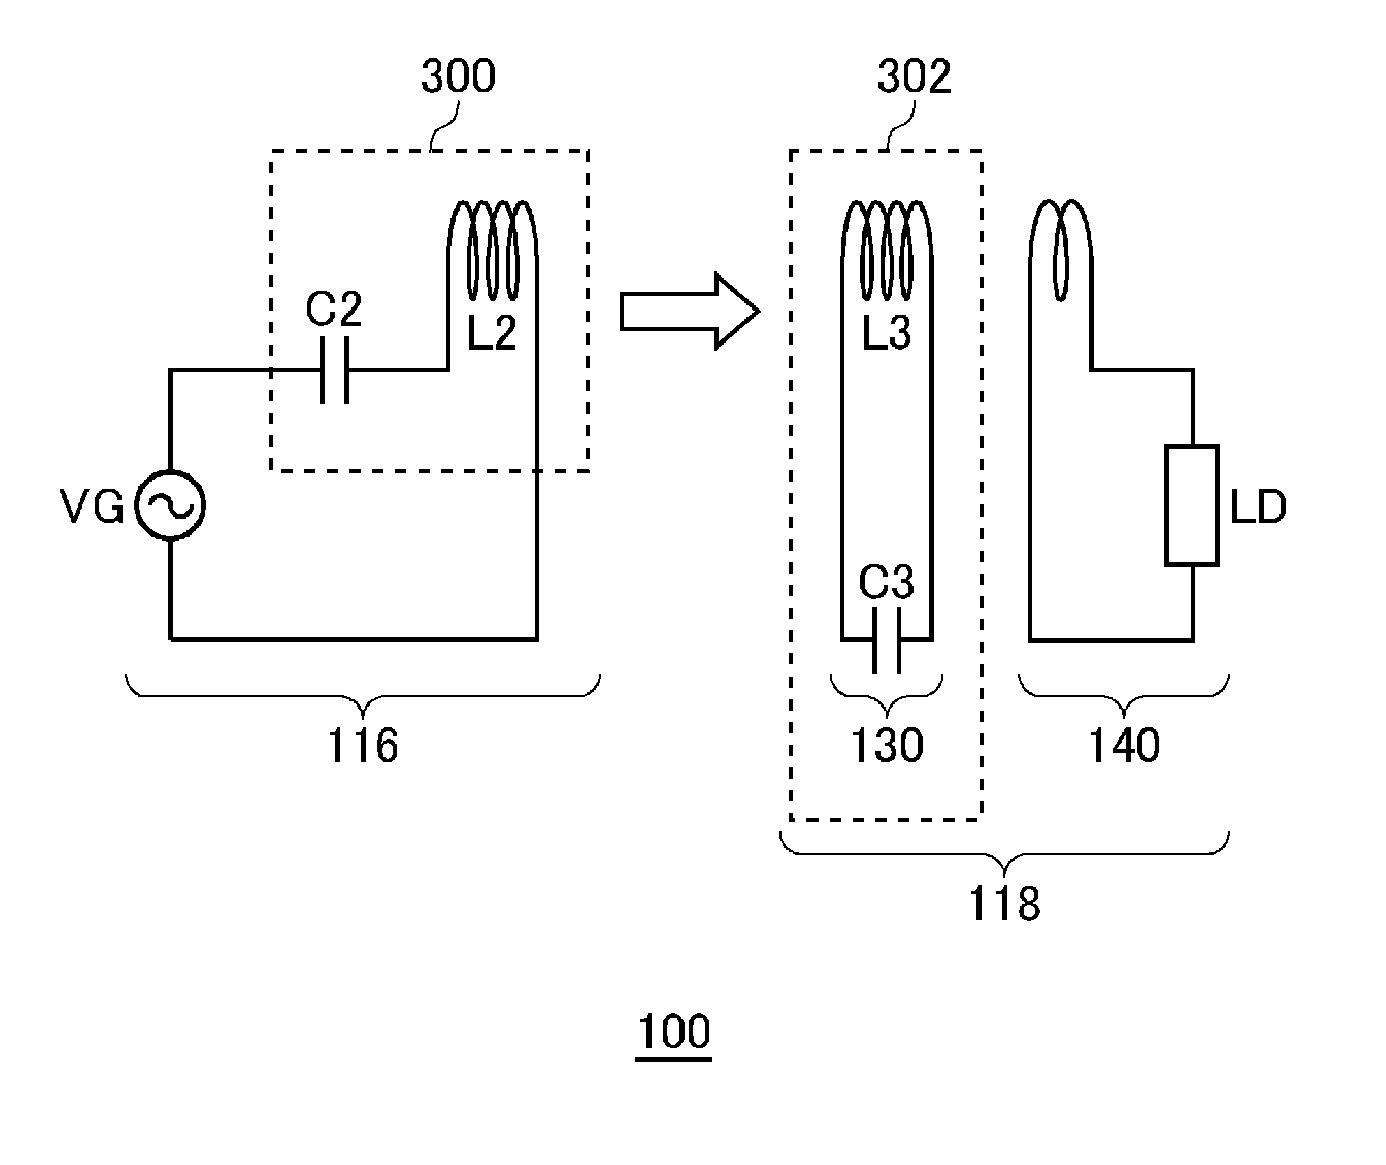 Wireless power receiver, wireless power transmission system, and power controller